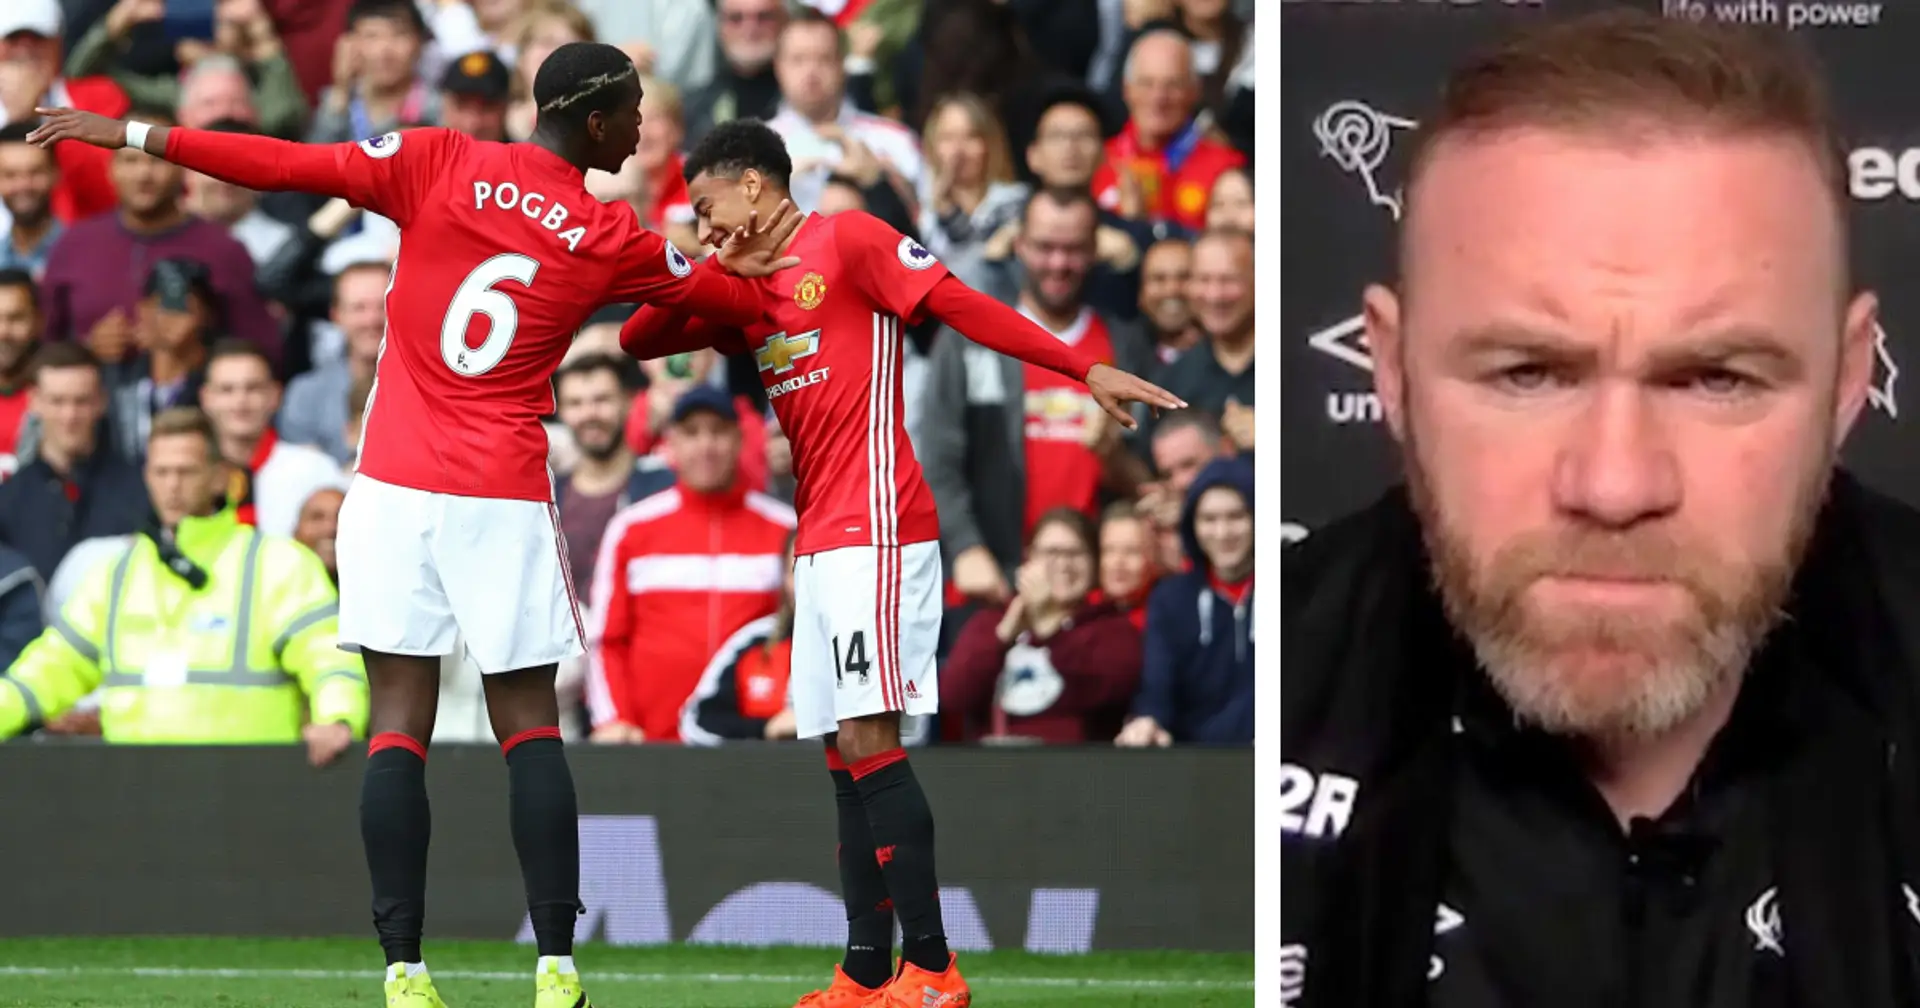 'Found Lingard and Pogba dancing': Wayne Rooney comment shows mentality of current Man United players